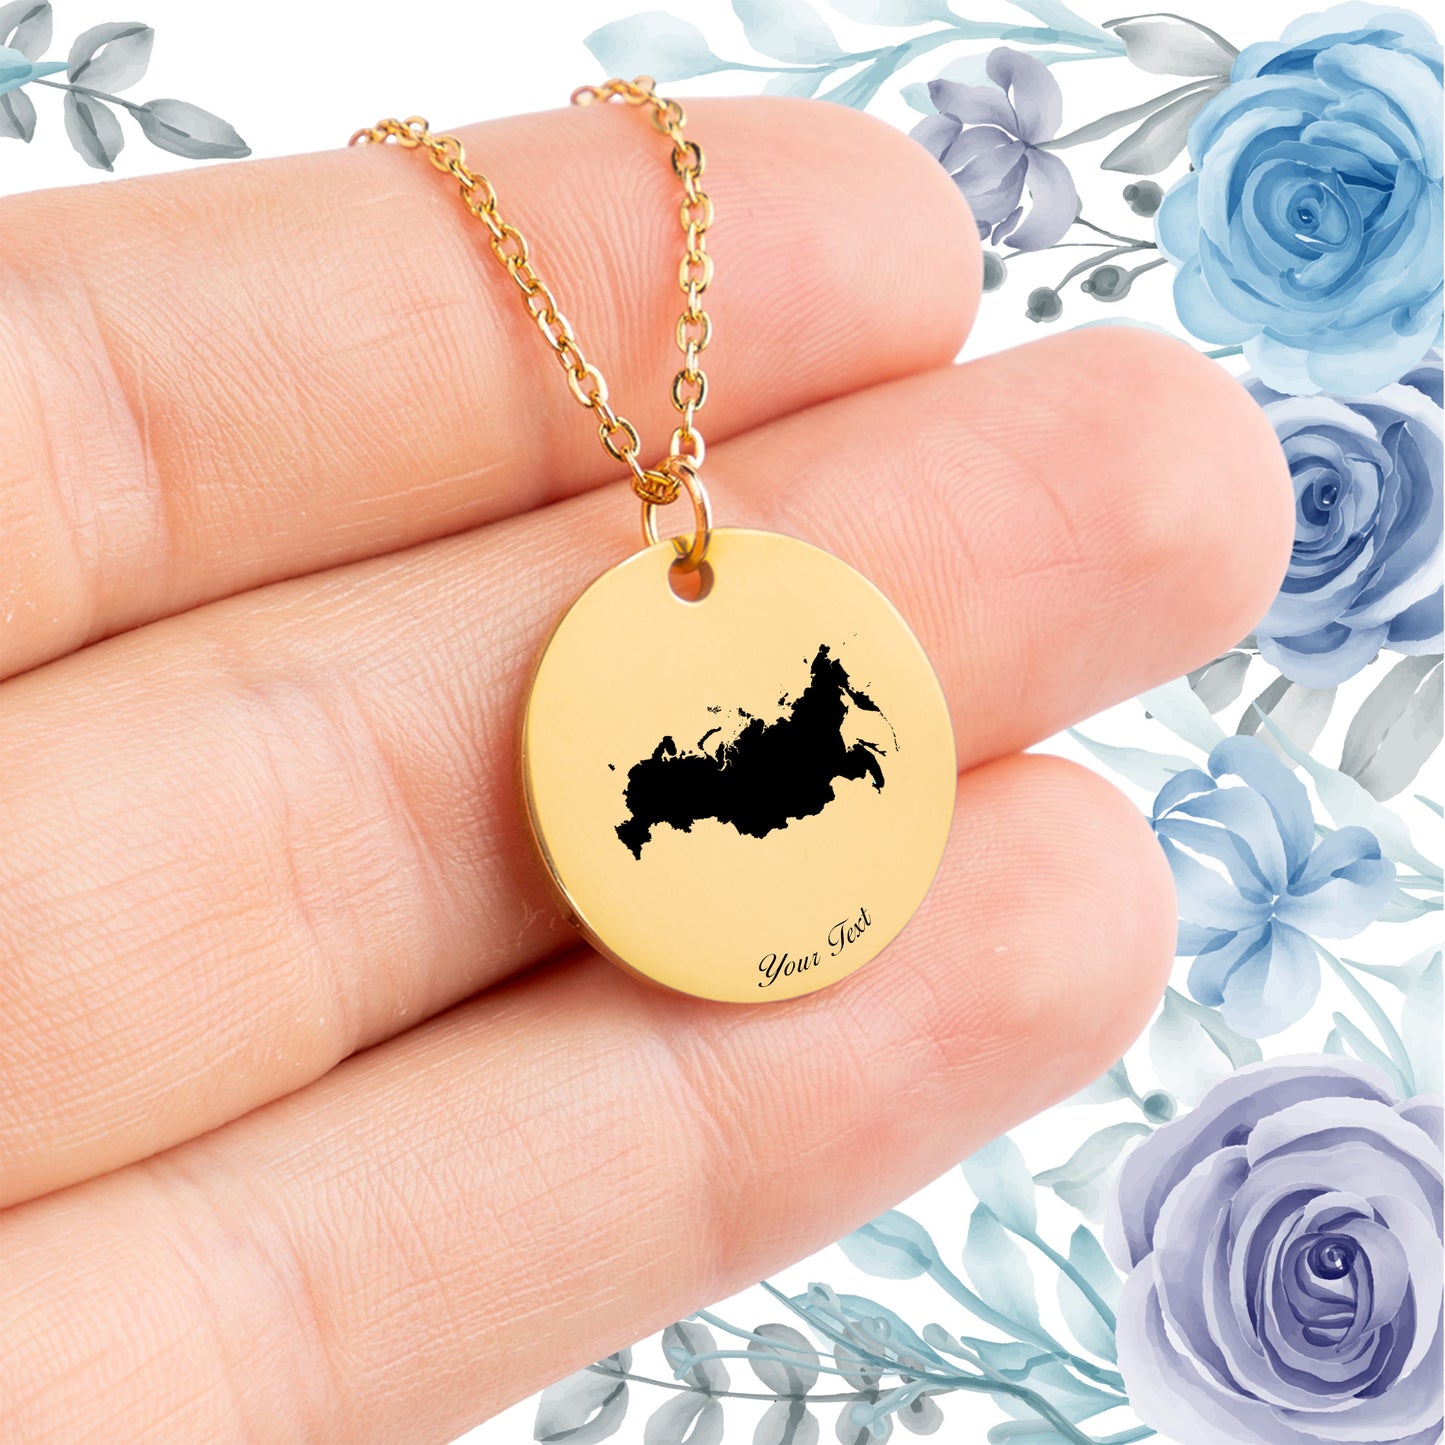 Russia Country Map Necklace - Personalizable Jewelry